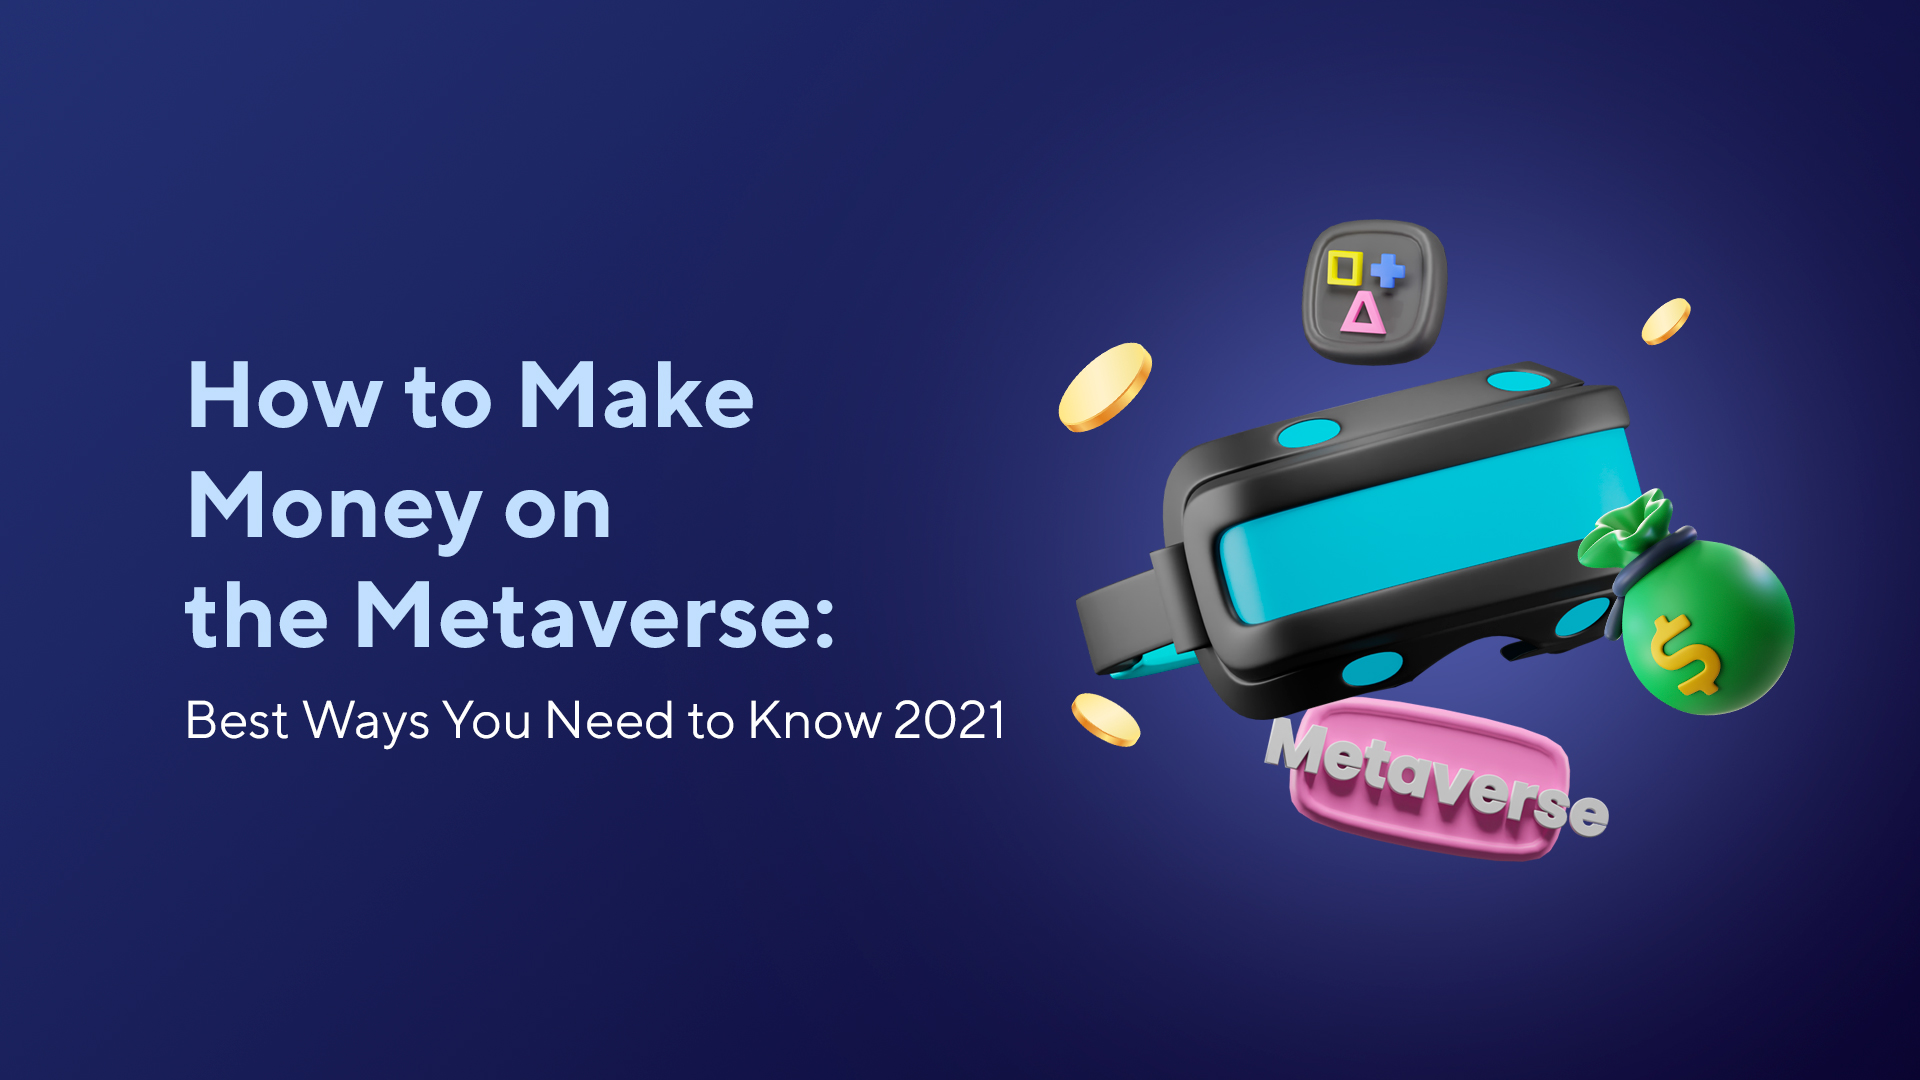 How to Make Money on the Metaverse: Key Ways You Need to Know 2021